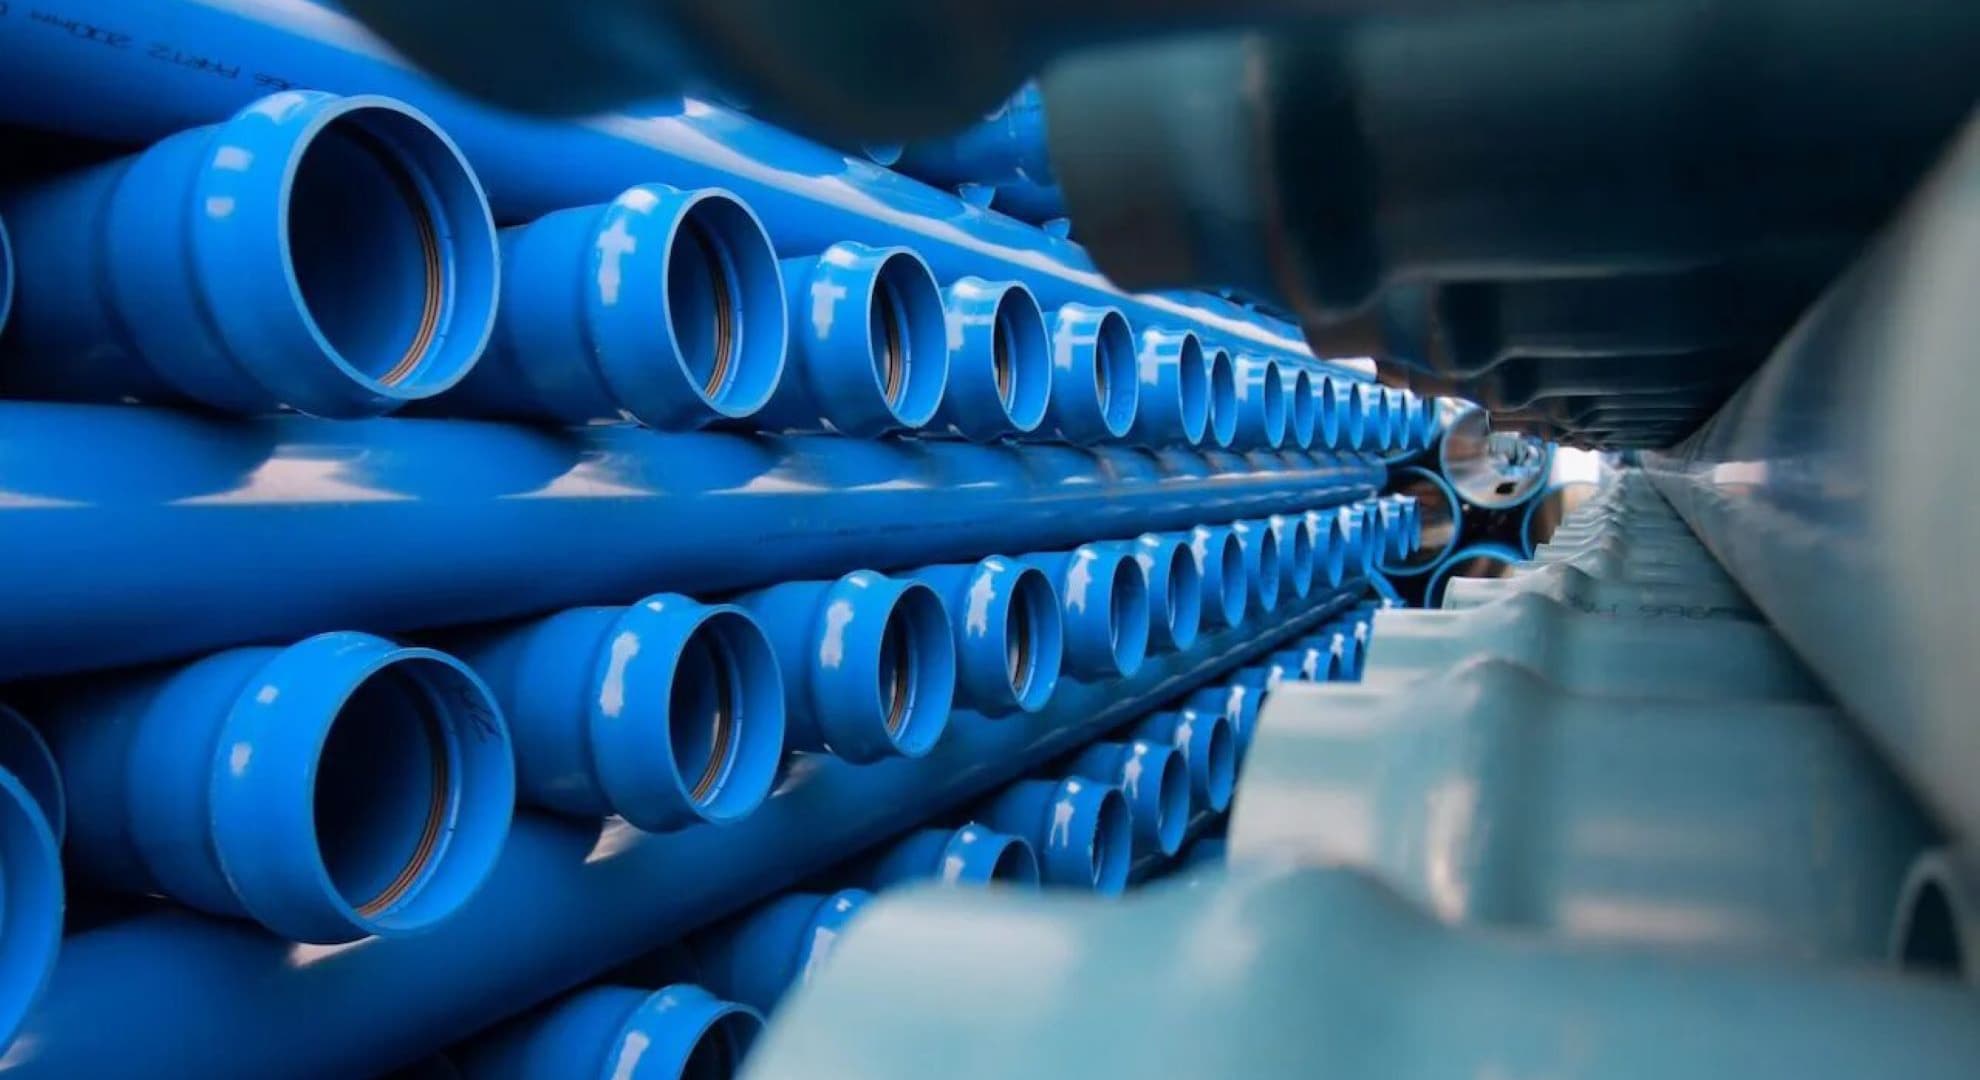 A row of PVC piping